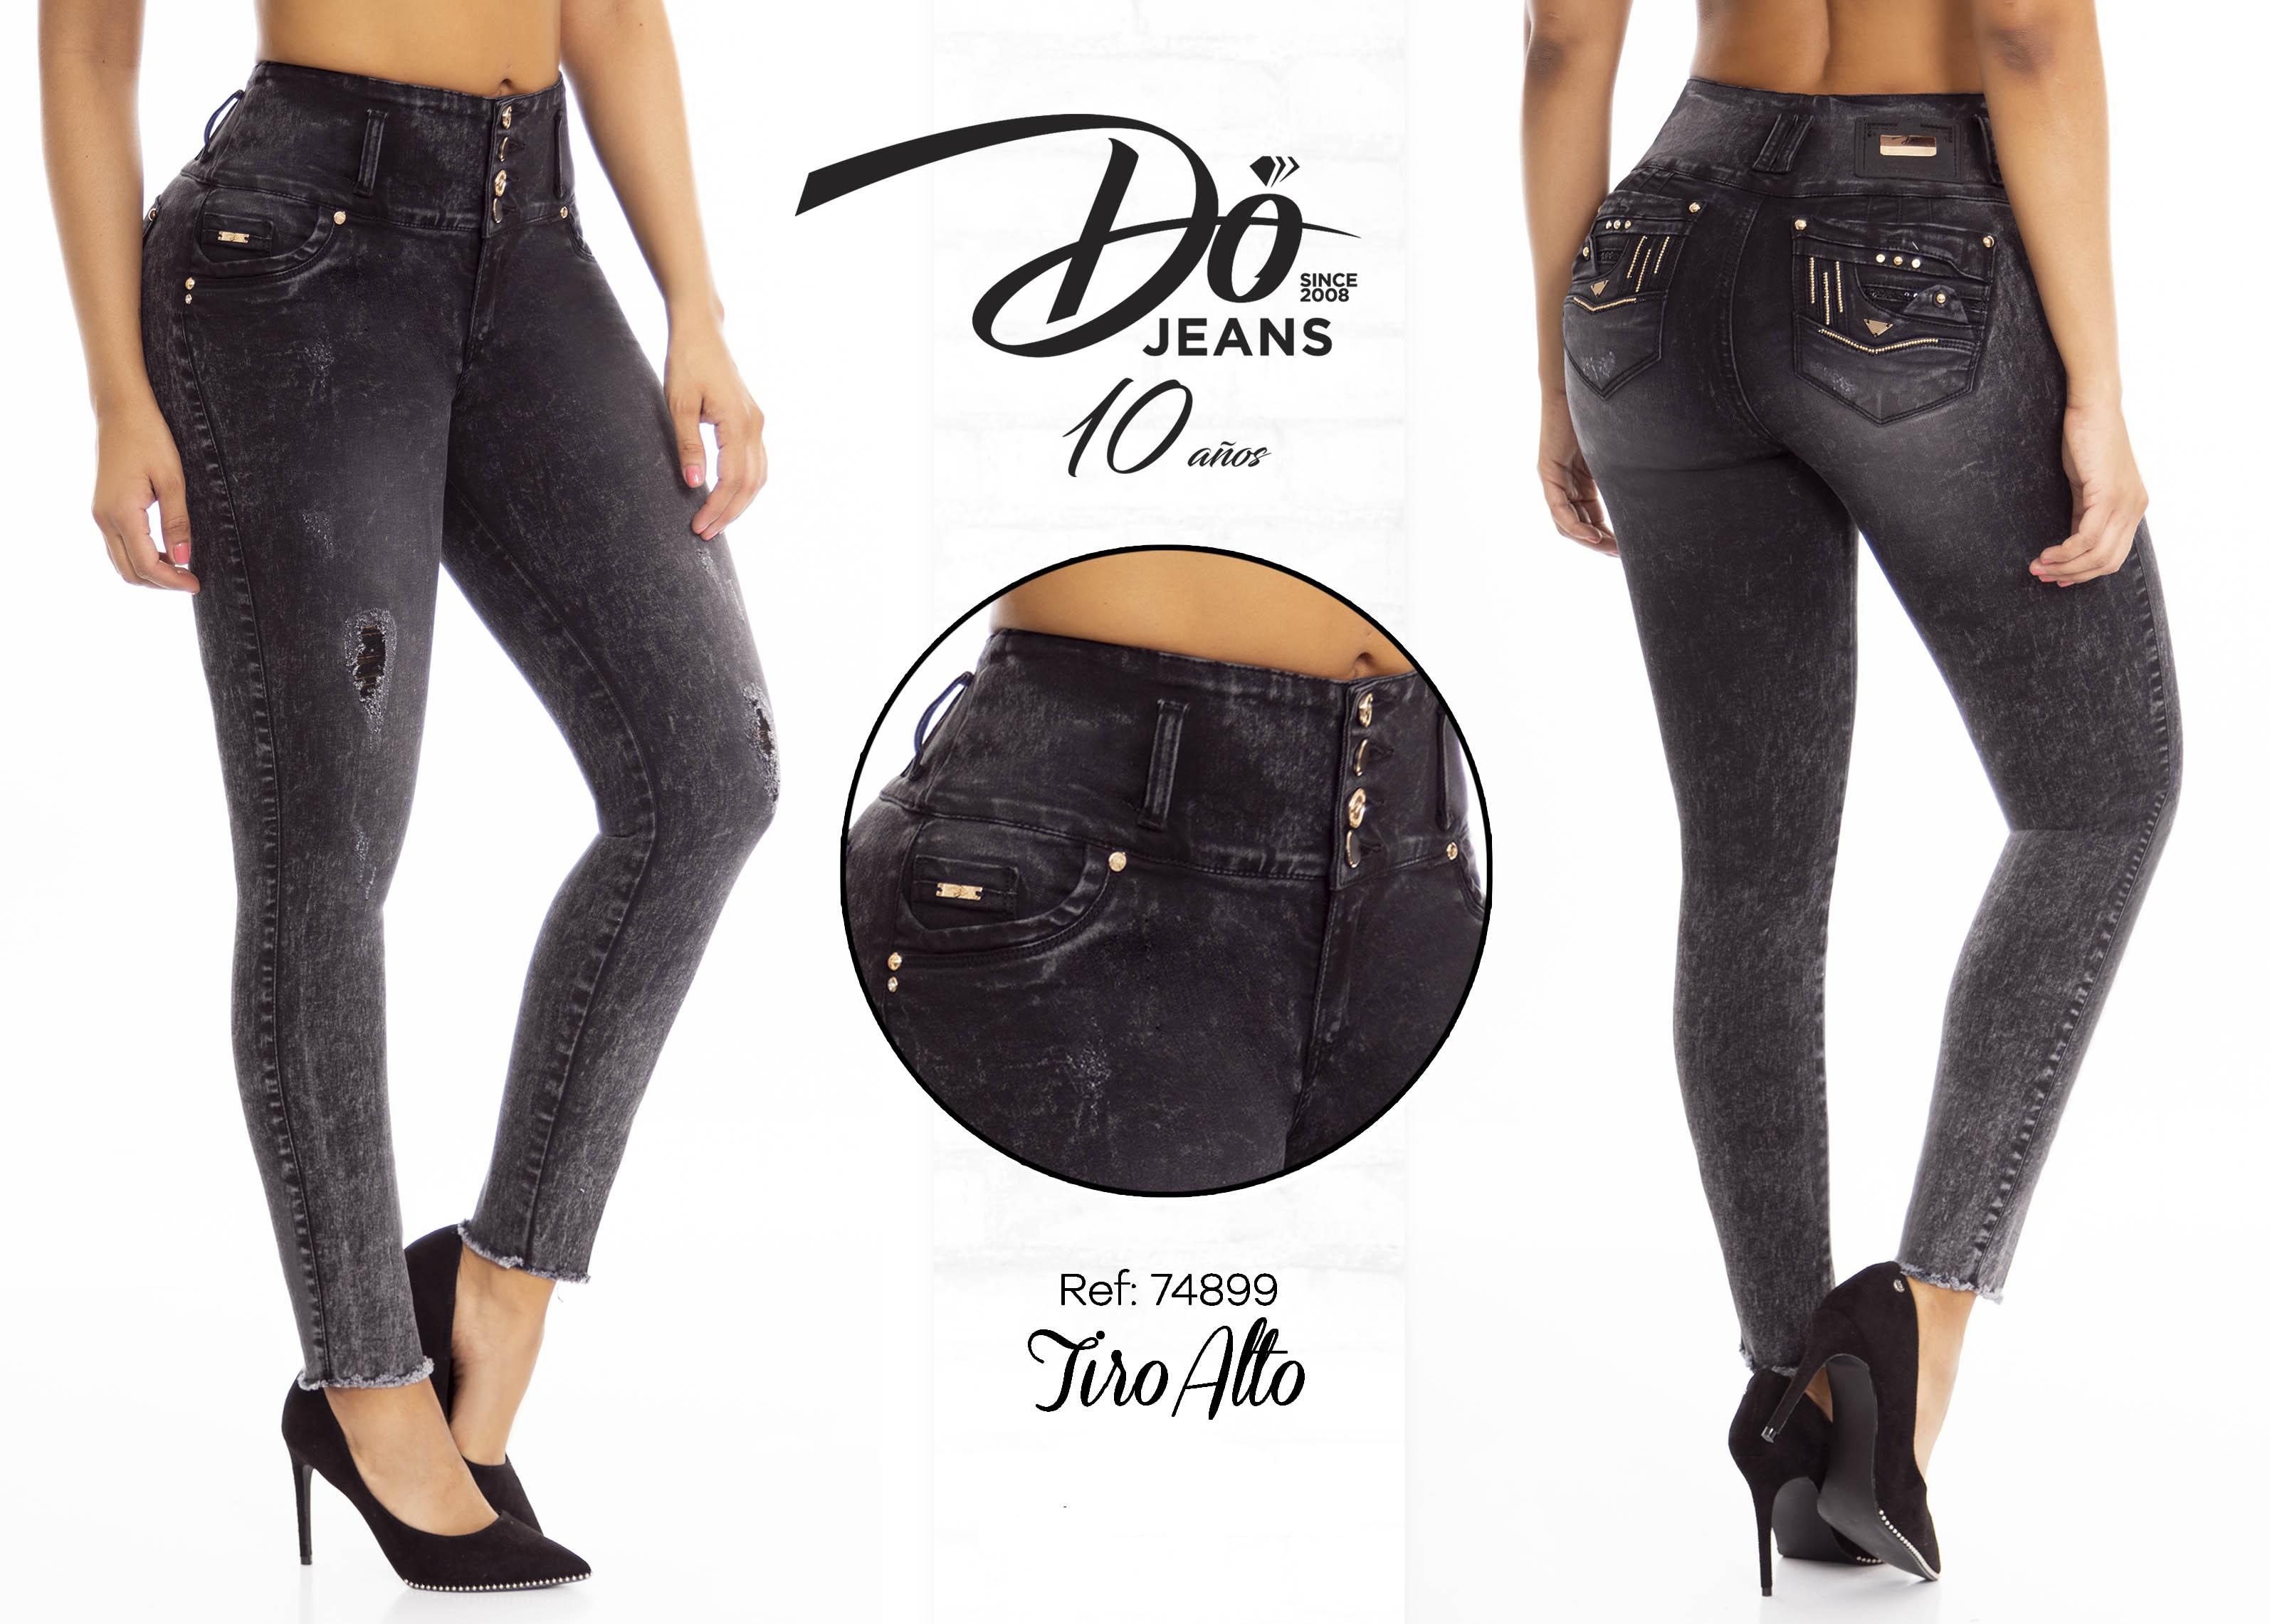 Jeans Levantacola Colombiano - Ref. 248 -74899 D